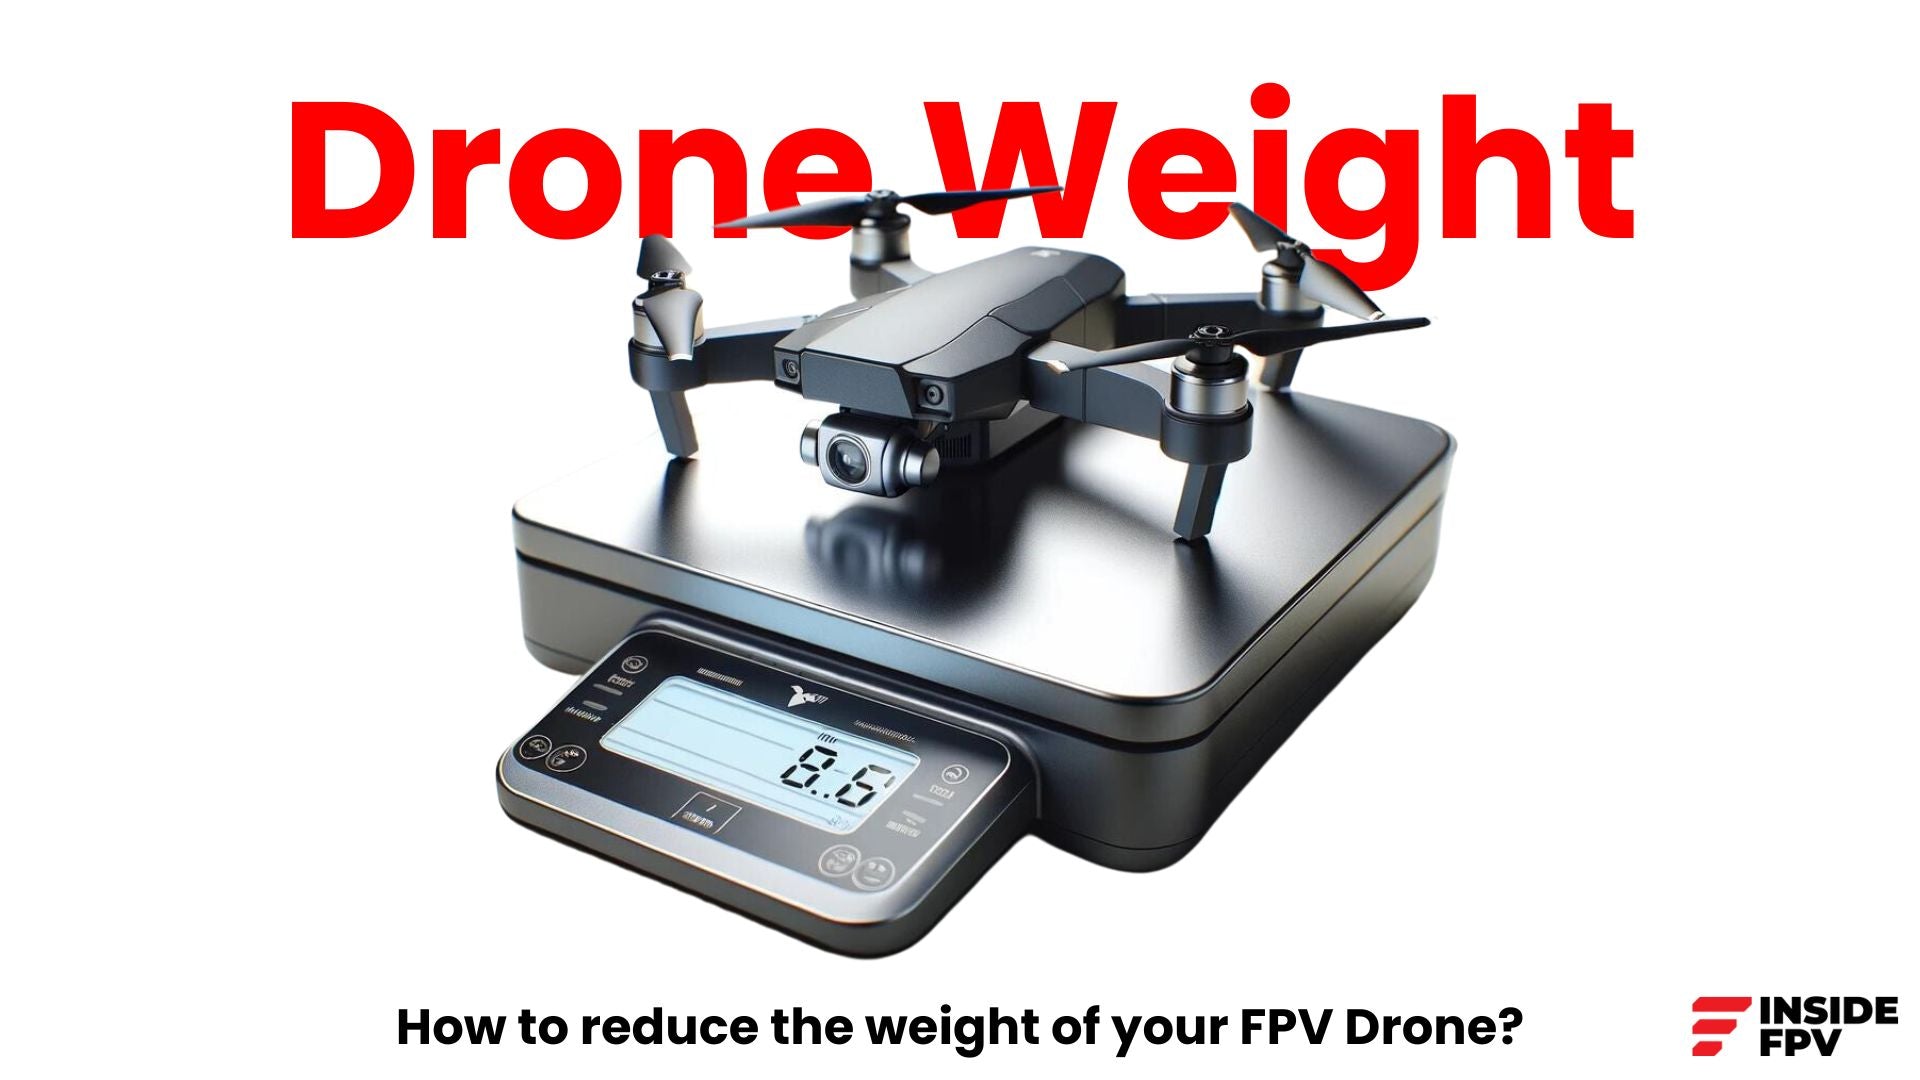 How to reduce weight of your fpv drone?